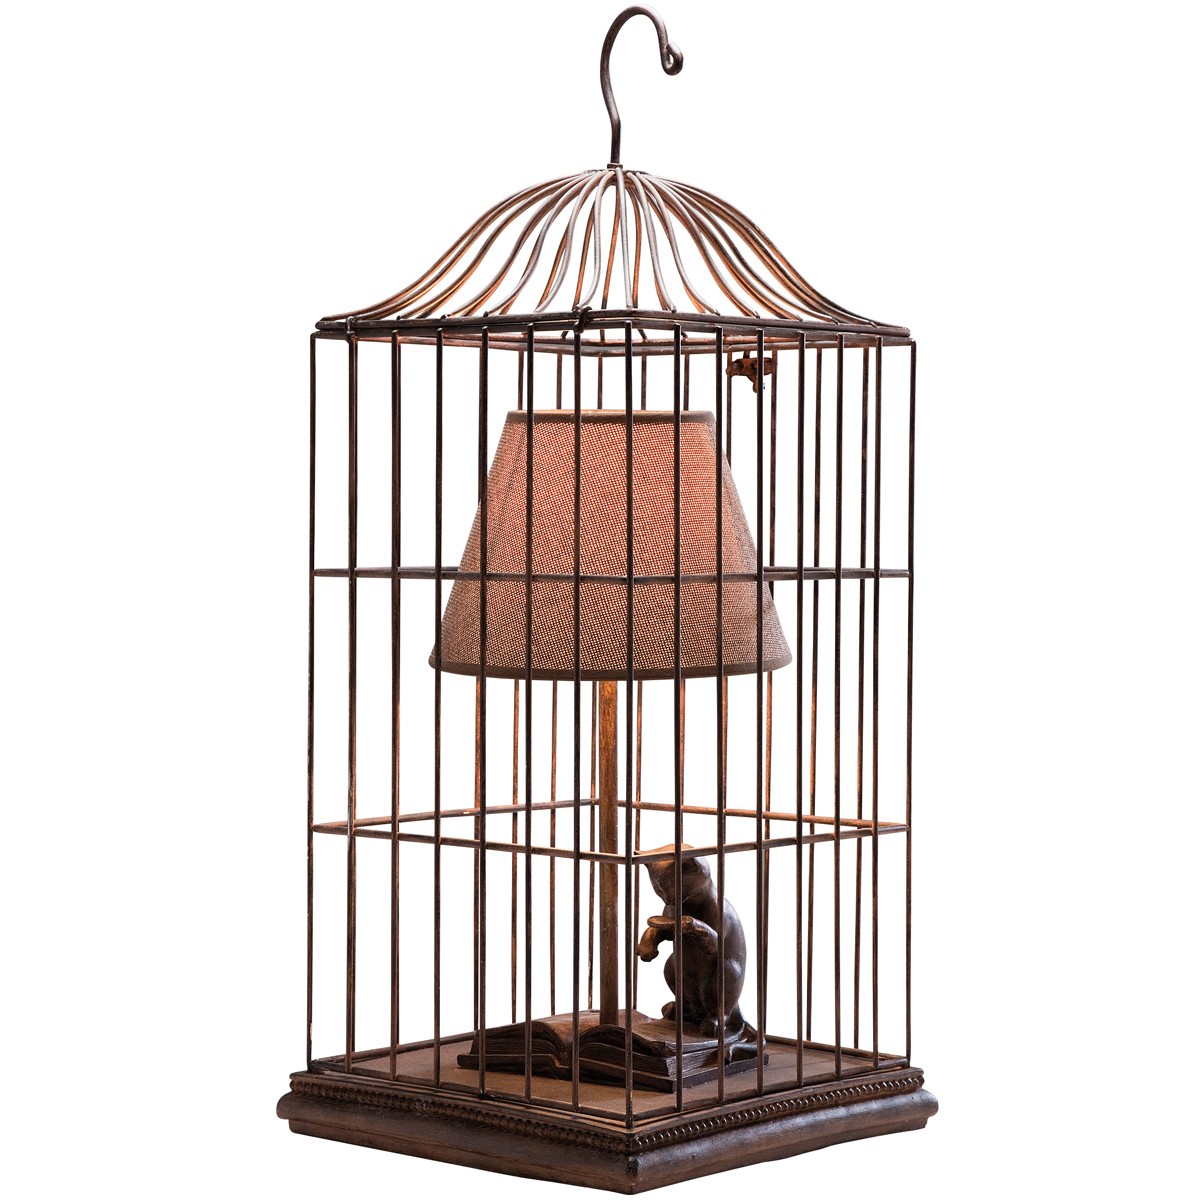 Cat In A Cage Table Lamp